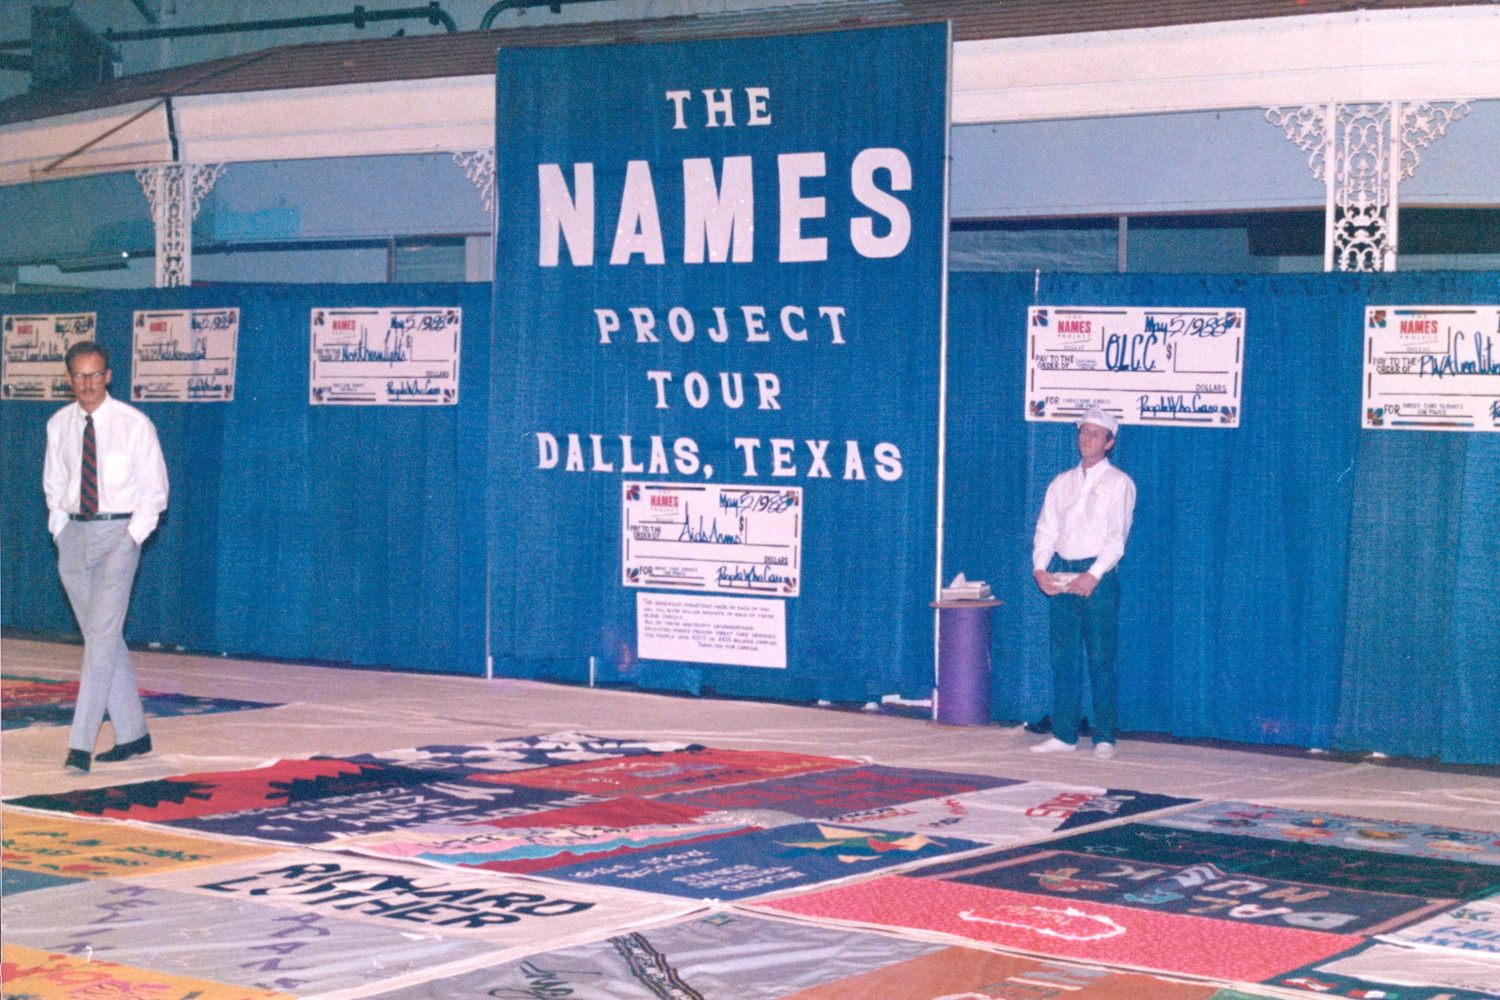 A display of the Dallas Names Project quilt panels, before joining the national quilt for display on the U.S. Mall, Dallas, TX, circa 1990. William shares, “I started to view the quilts at Fair Park and again later when it was on full display on the National Mall. After getting 10 or 15 feet into the panels, I turned around and left. It was too overwhelming to see the panels of friends who had died of AIDS.” Photo courtesy of William Waybourn.